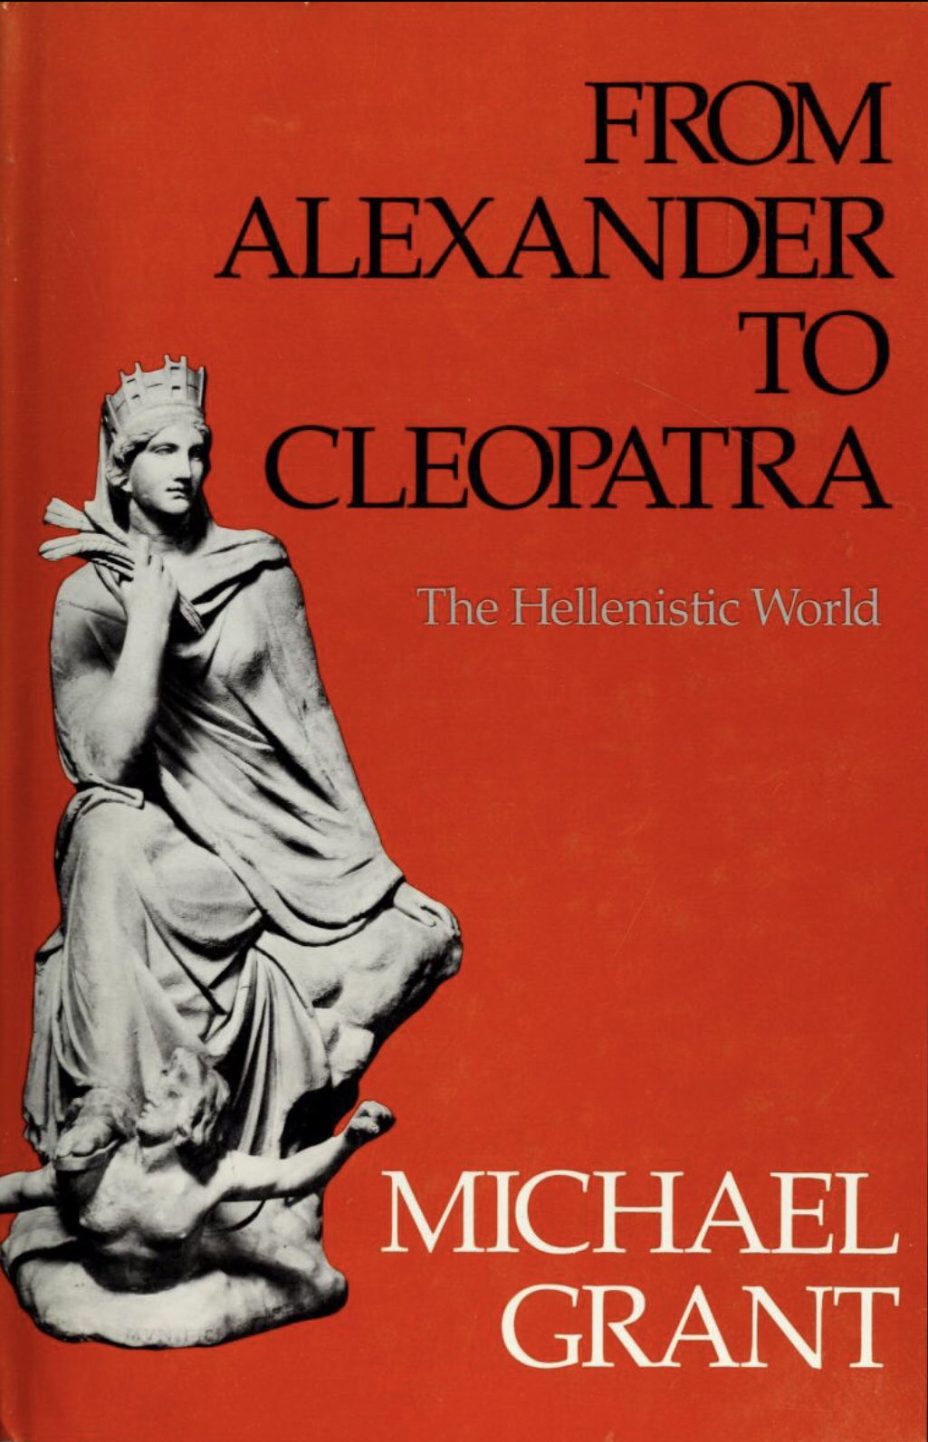 1982_Michael Grant - 'From Alexander to Cleopatra'